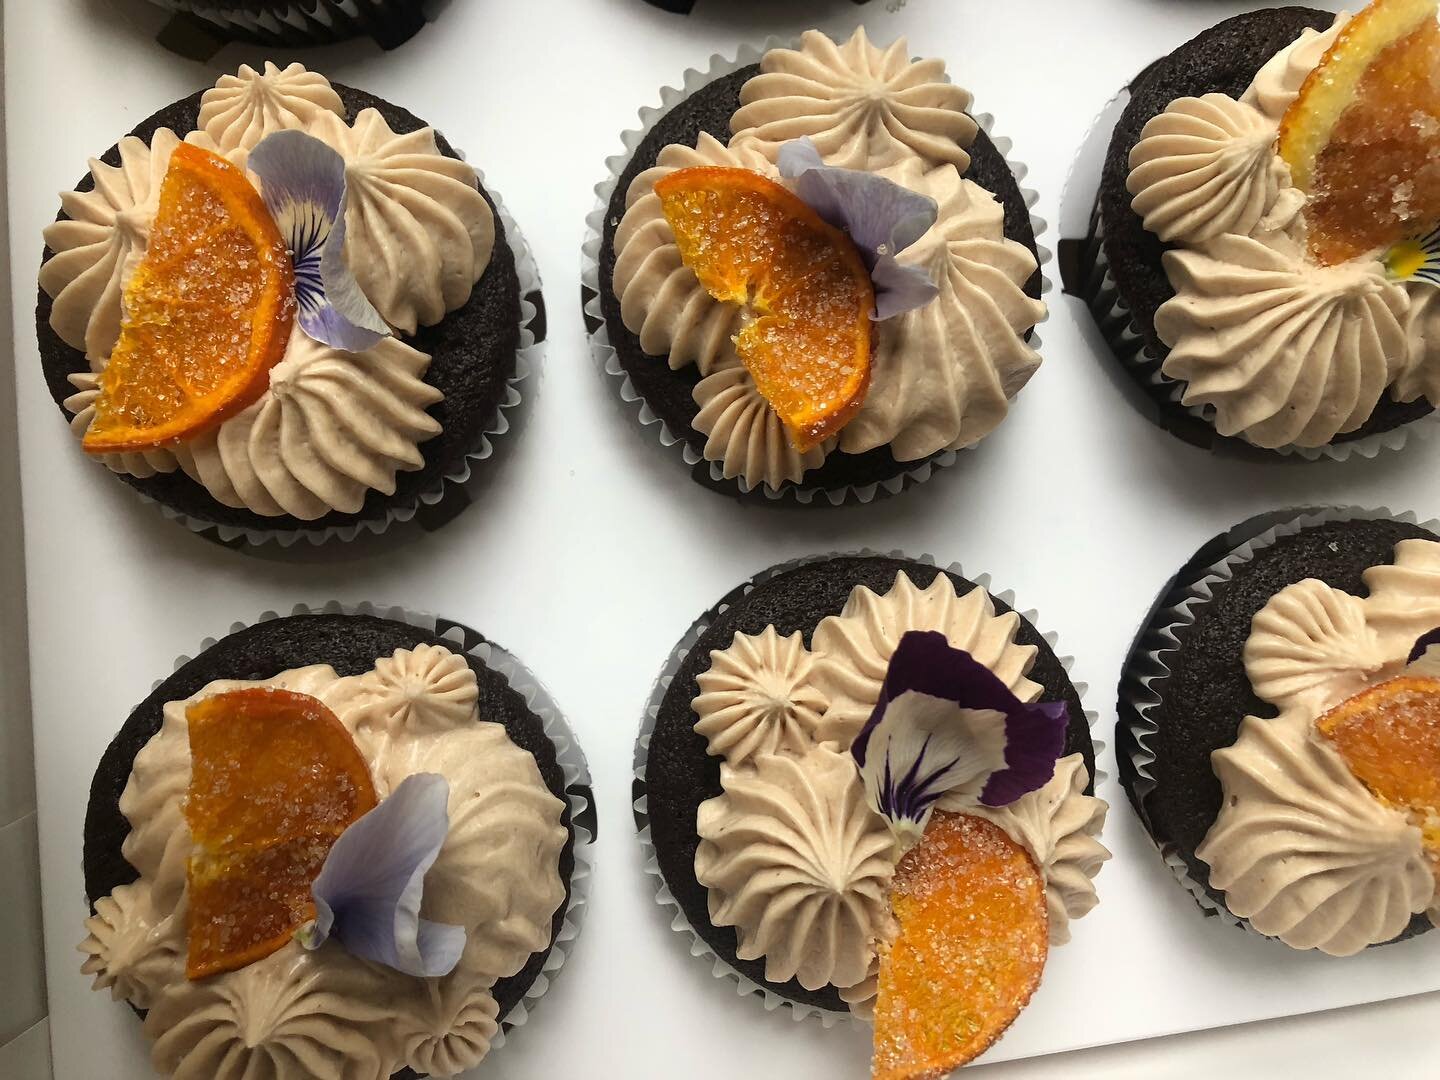 Gluten free &amp; dairy free Chocolate Cupcake with vegan coffee cream frosting.

Topped with a pansy and candied orange slice 🍊

#glutenfree #dairyfree #veganbuttercream #coffeefreak #chocolate